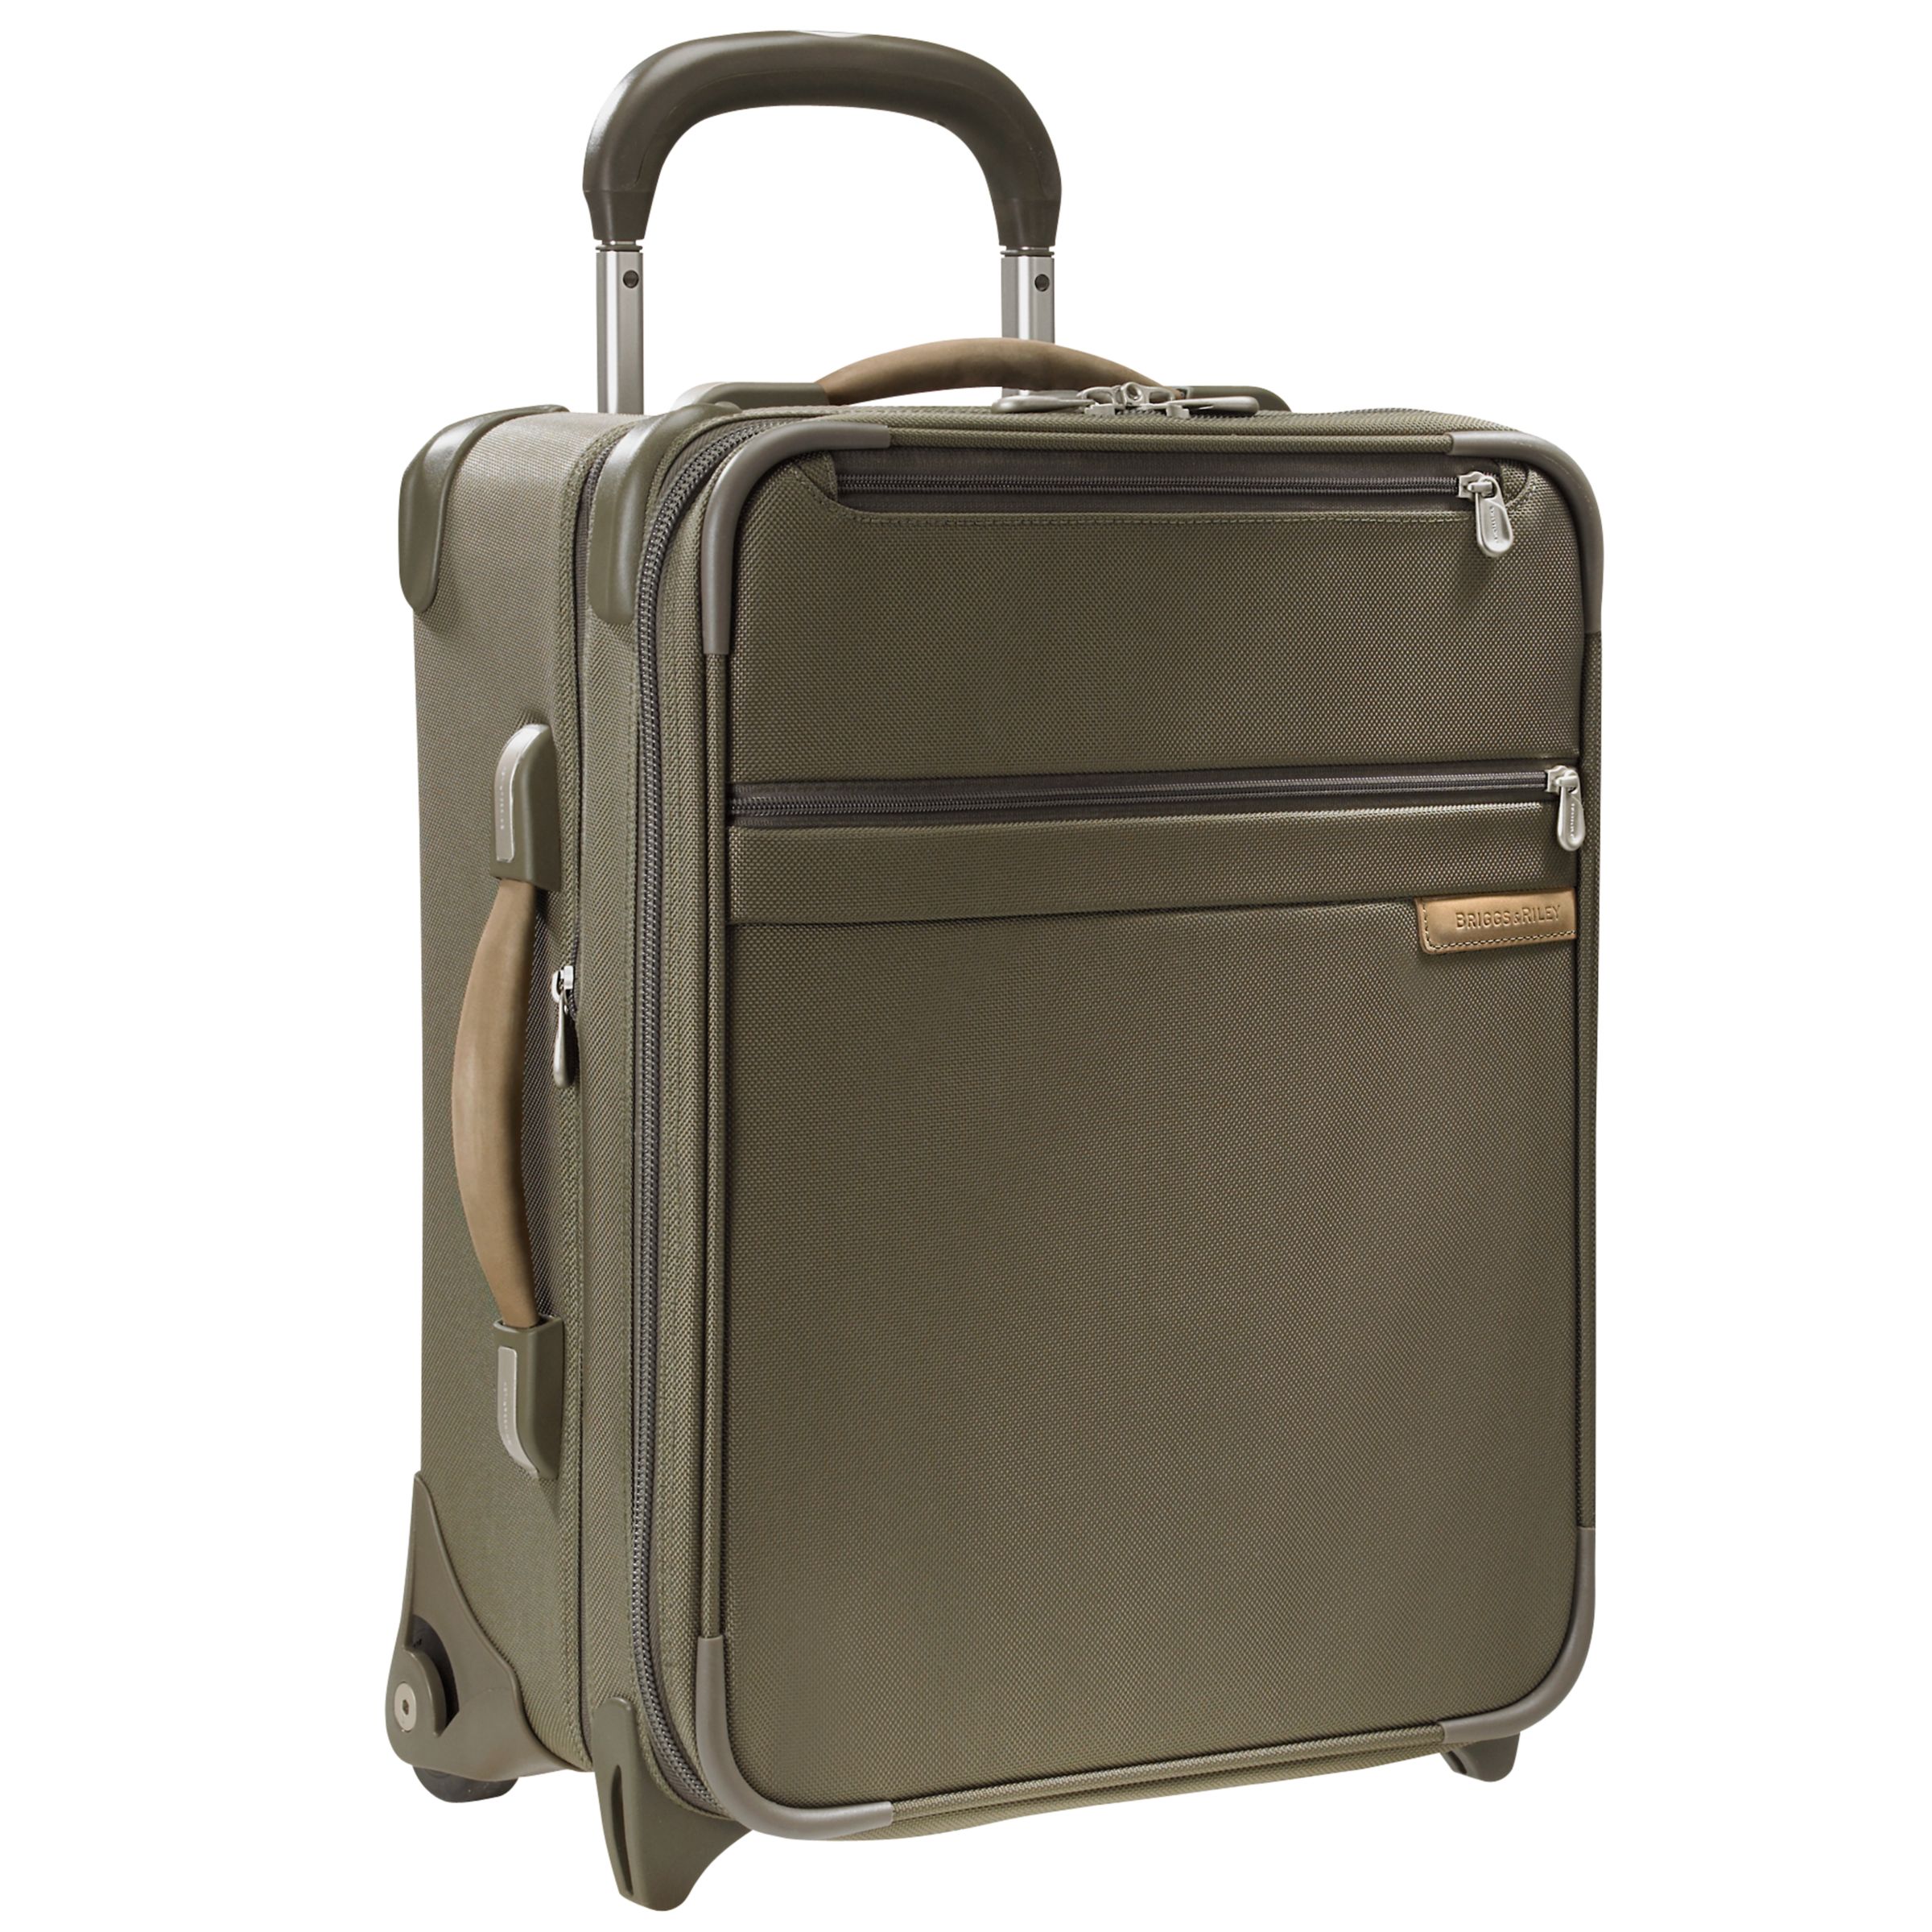 Briggs & Riley 18" Expandable Cabin Trolley Case, Olive at John Lewis